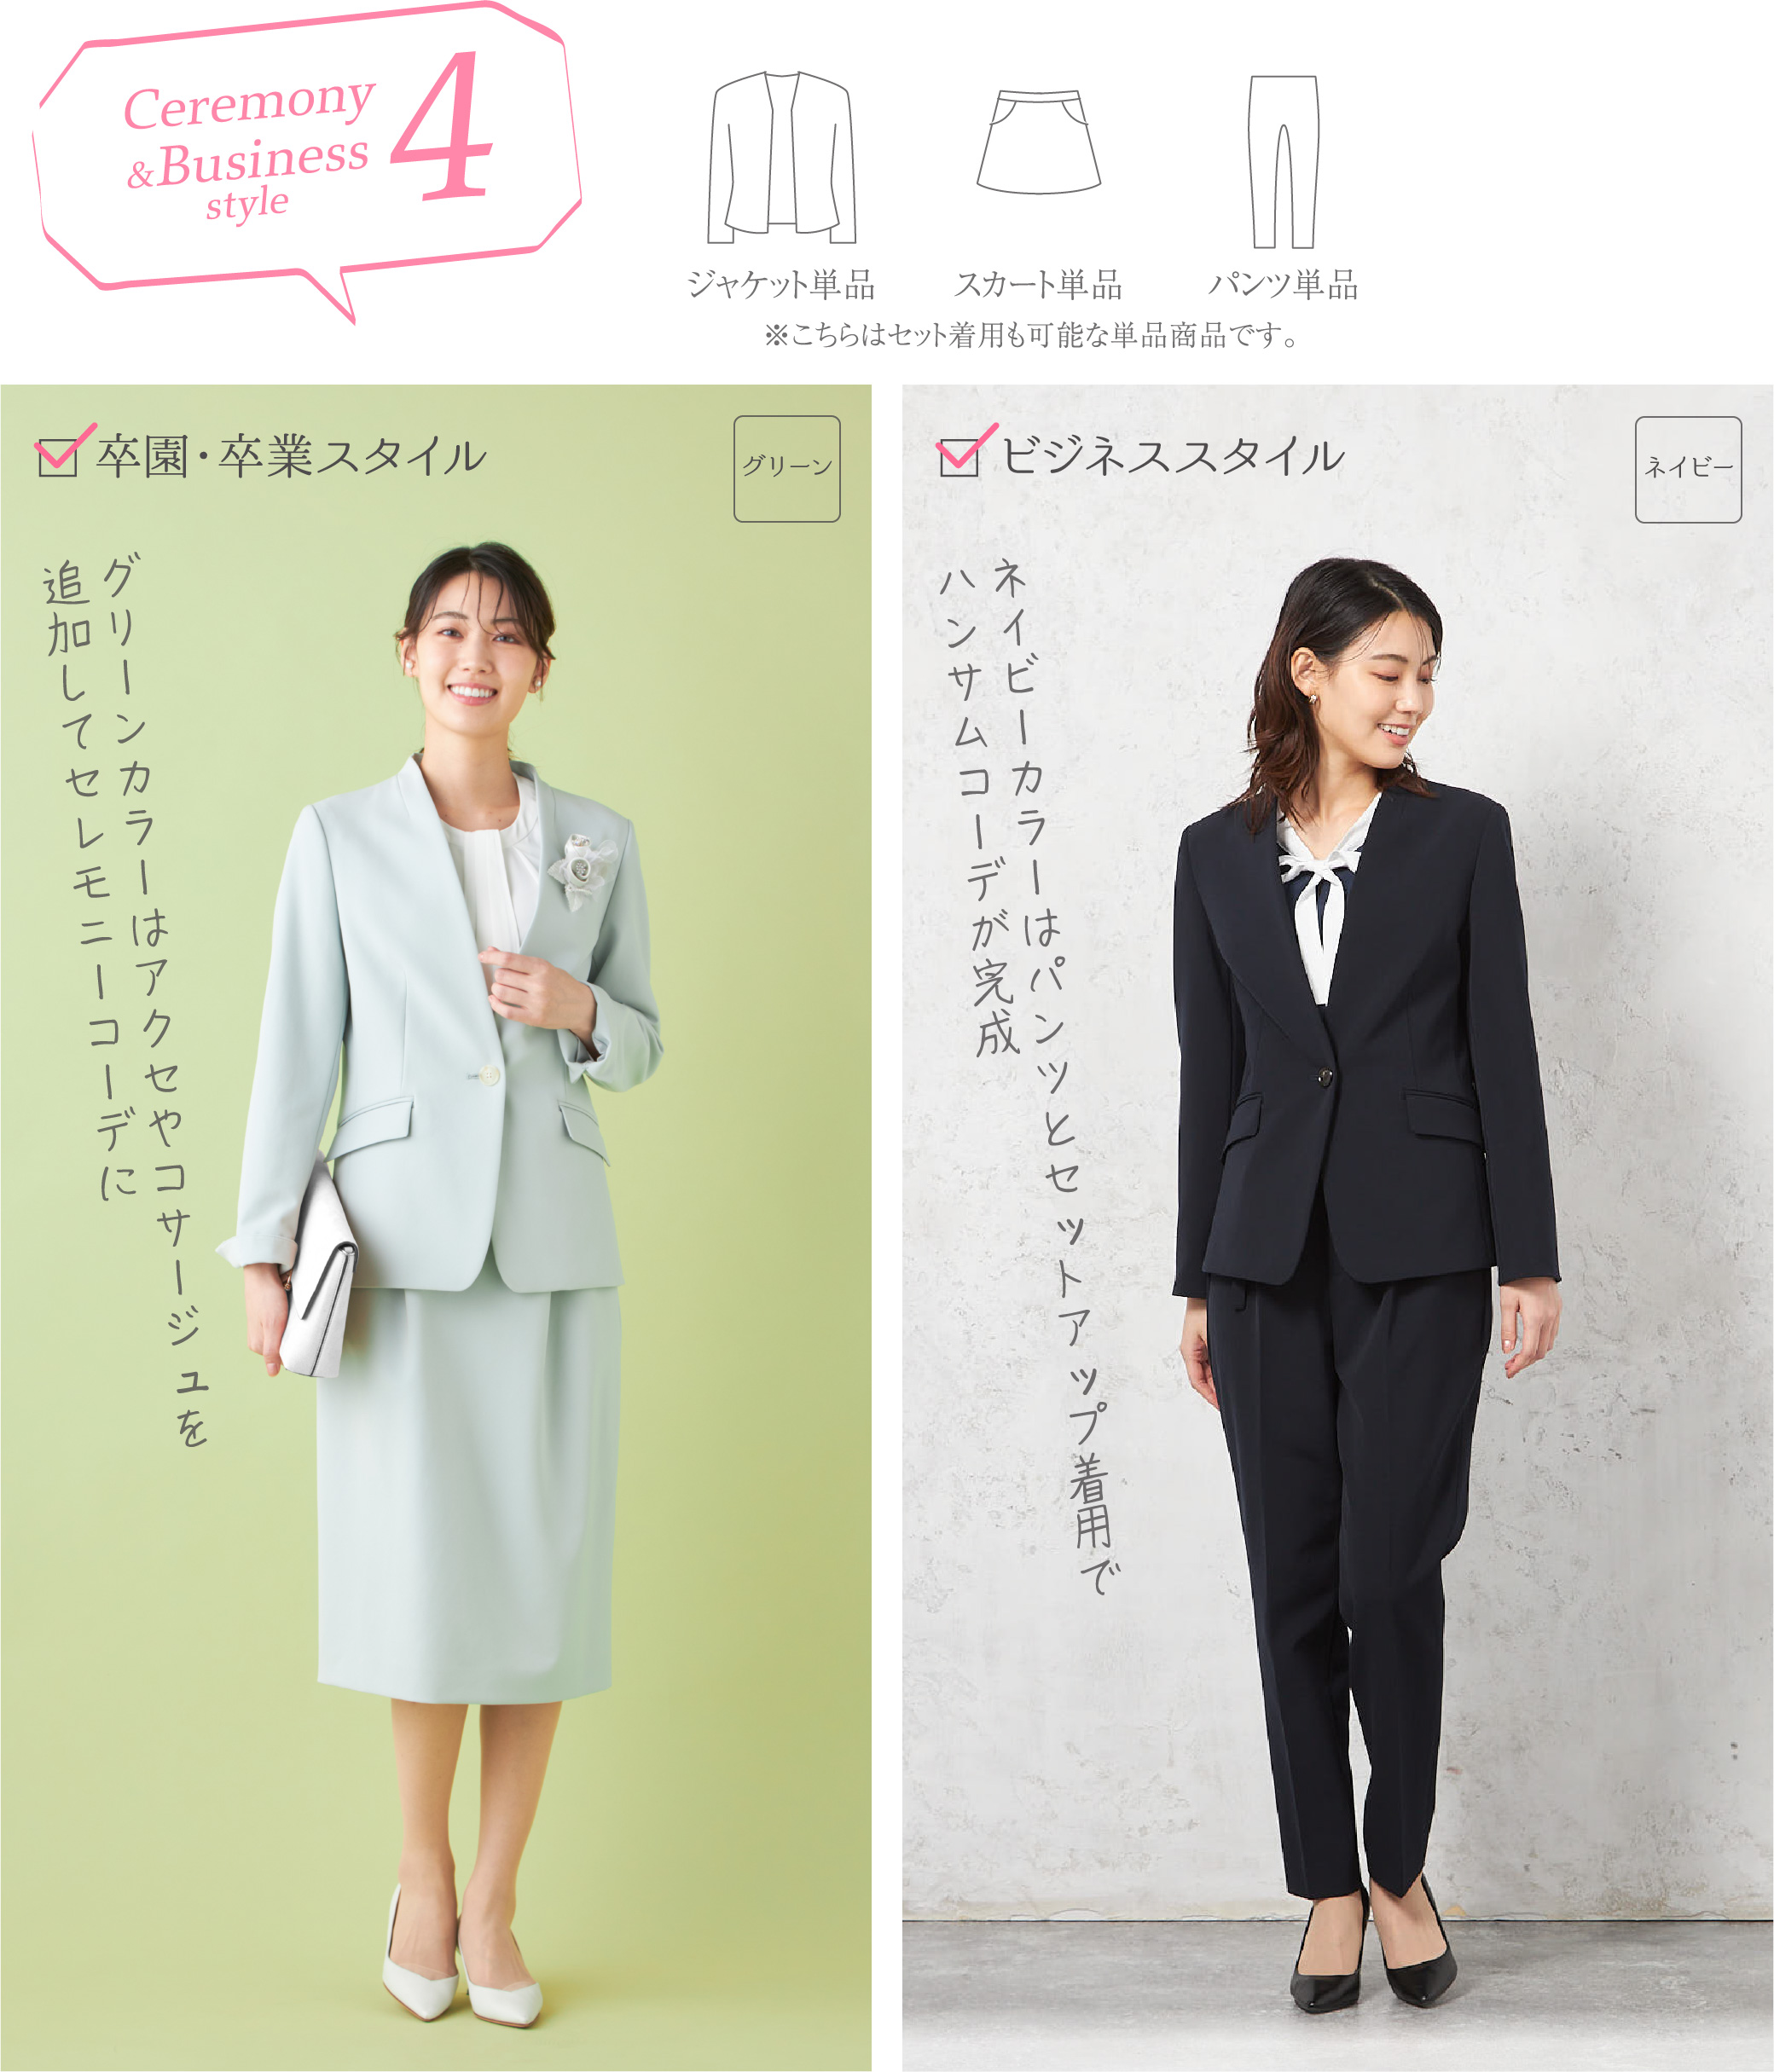 Ceremony&Business style 4